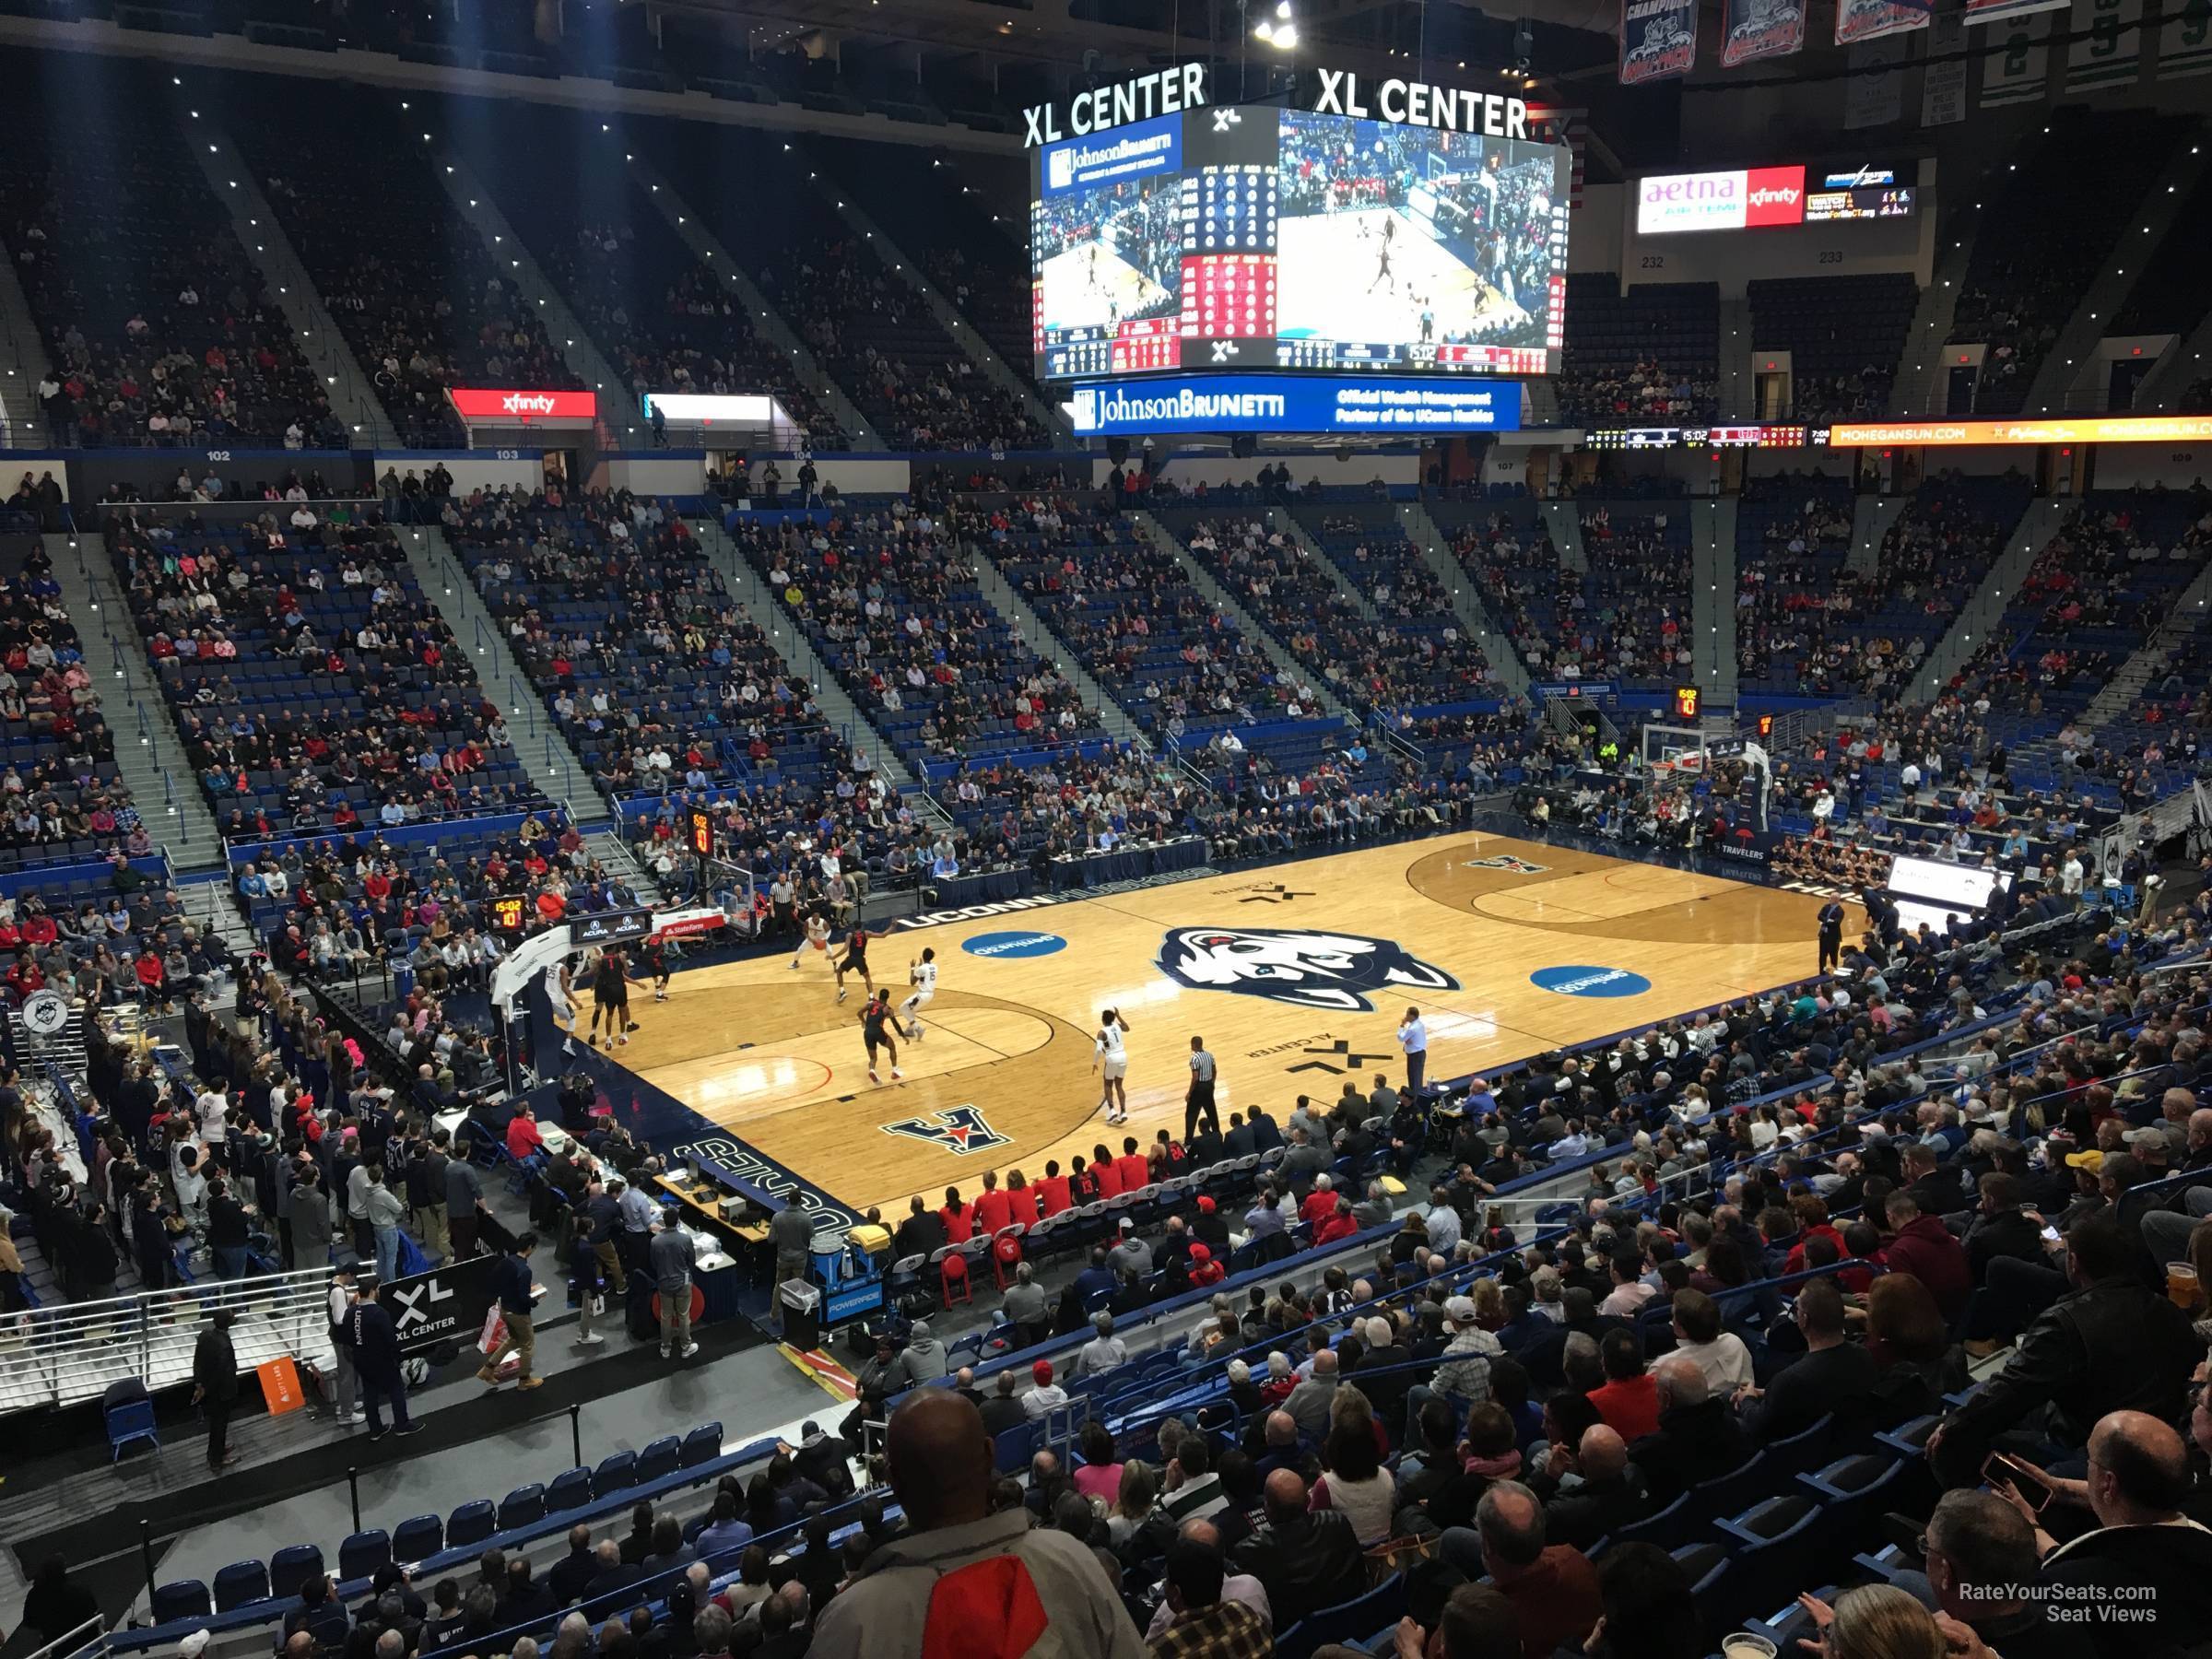 section 118, row r seat view  - xl center